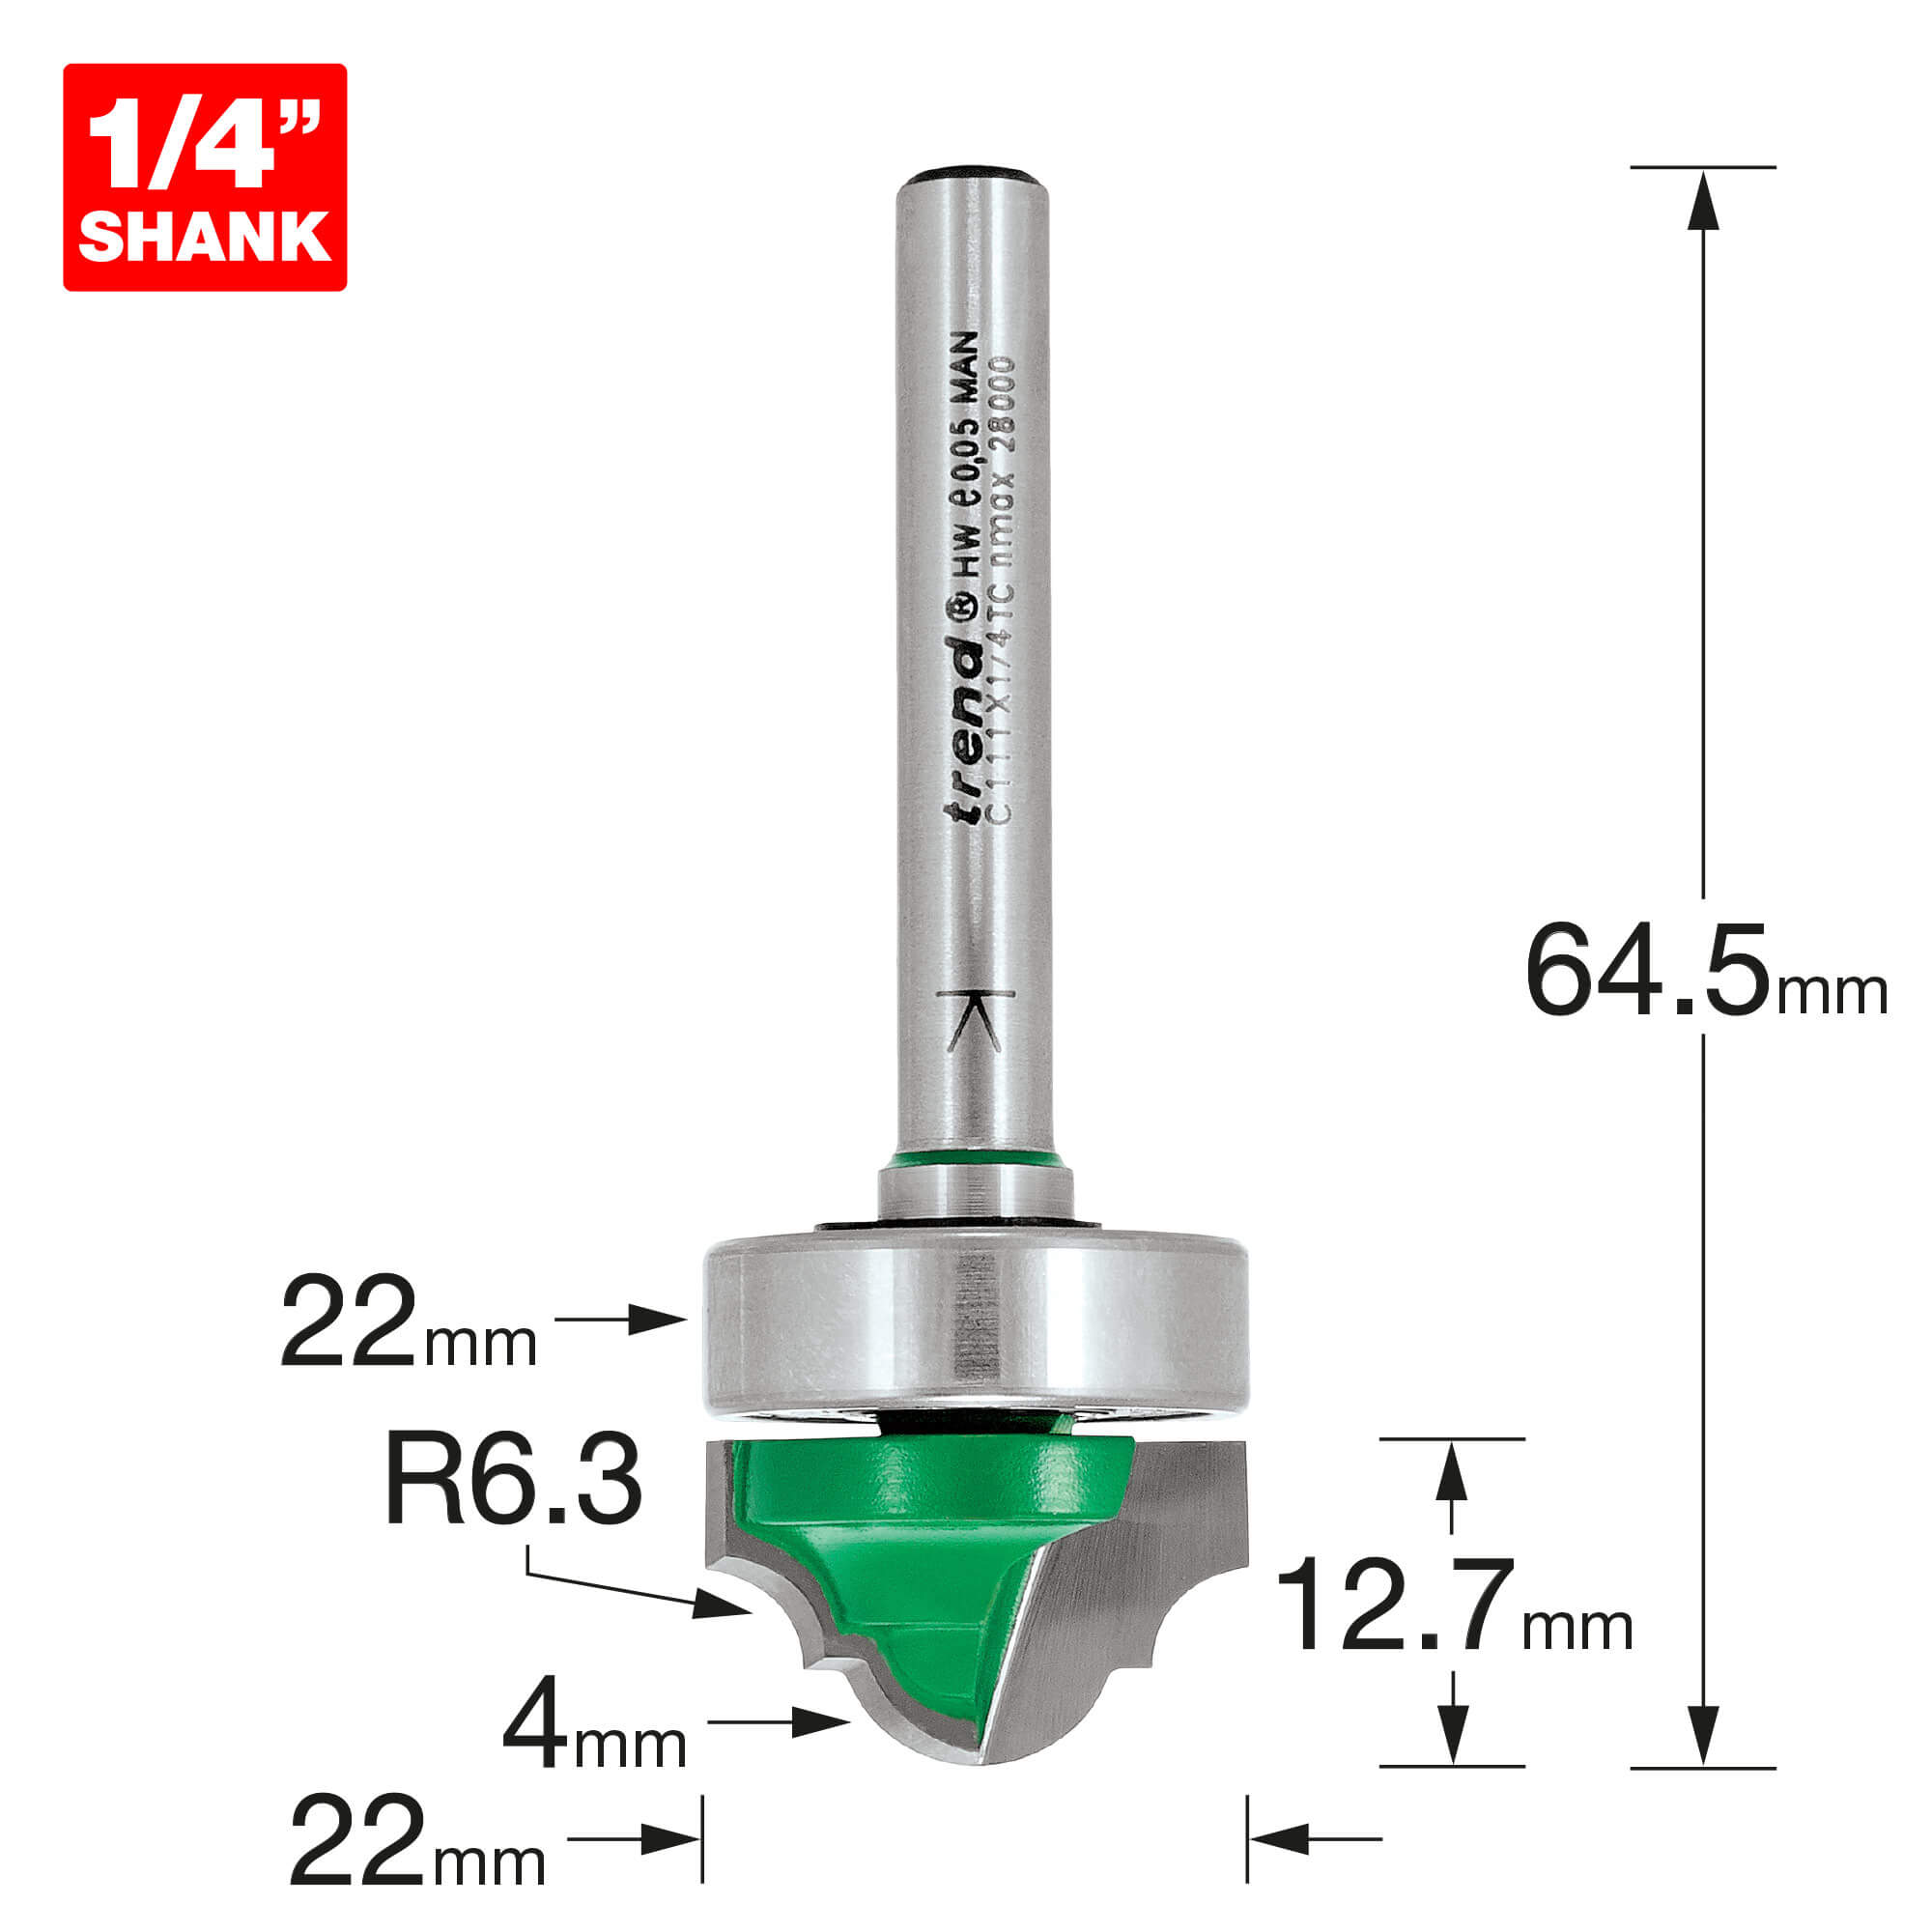 Image of Trend CRAFTPRO Bearing Guided Classic Decor Router Cutter 22mm 12.7mm 1/4"